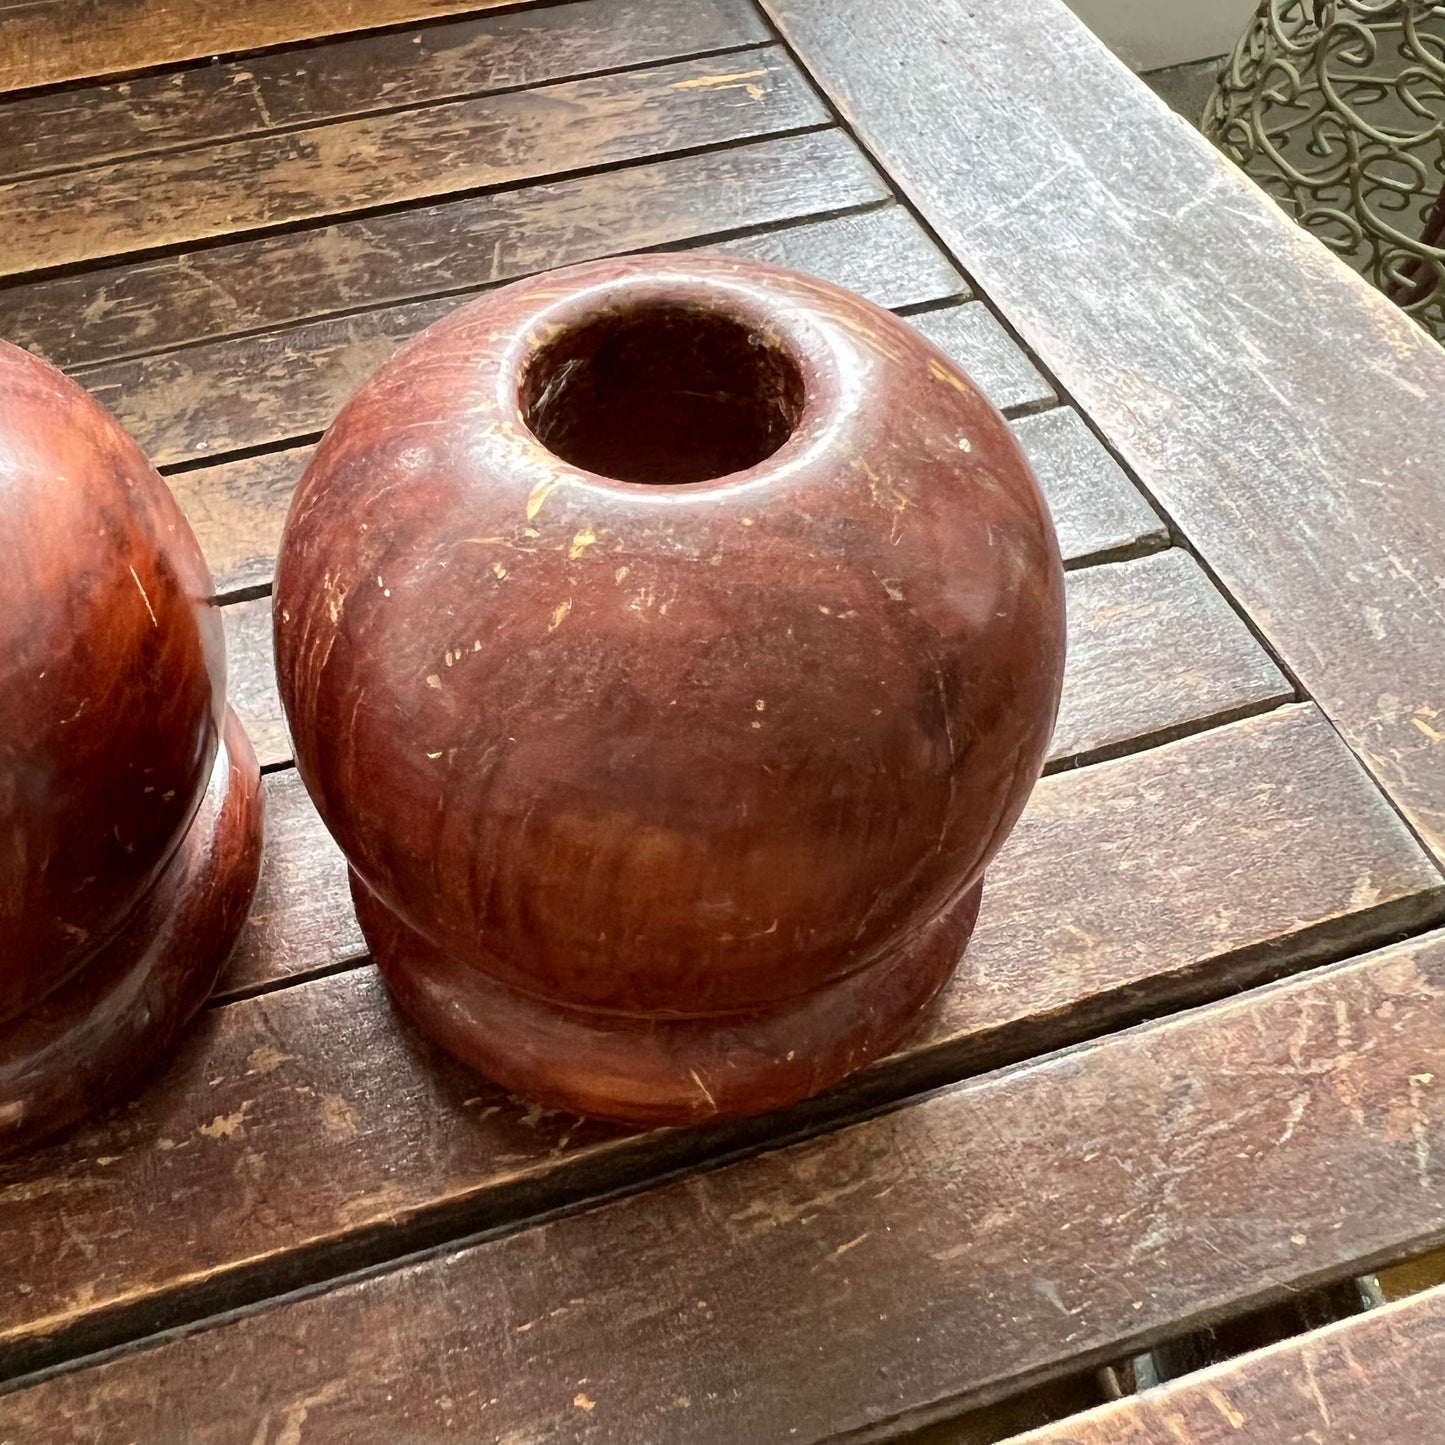 Vintage Round Wooden Candle Holders - Set of 2